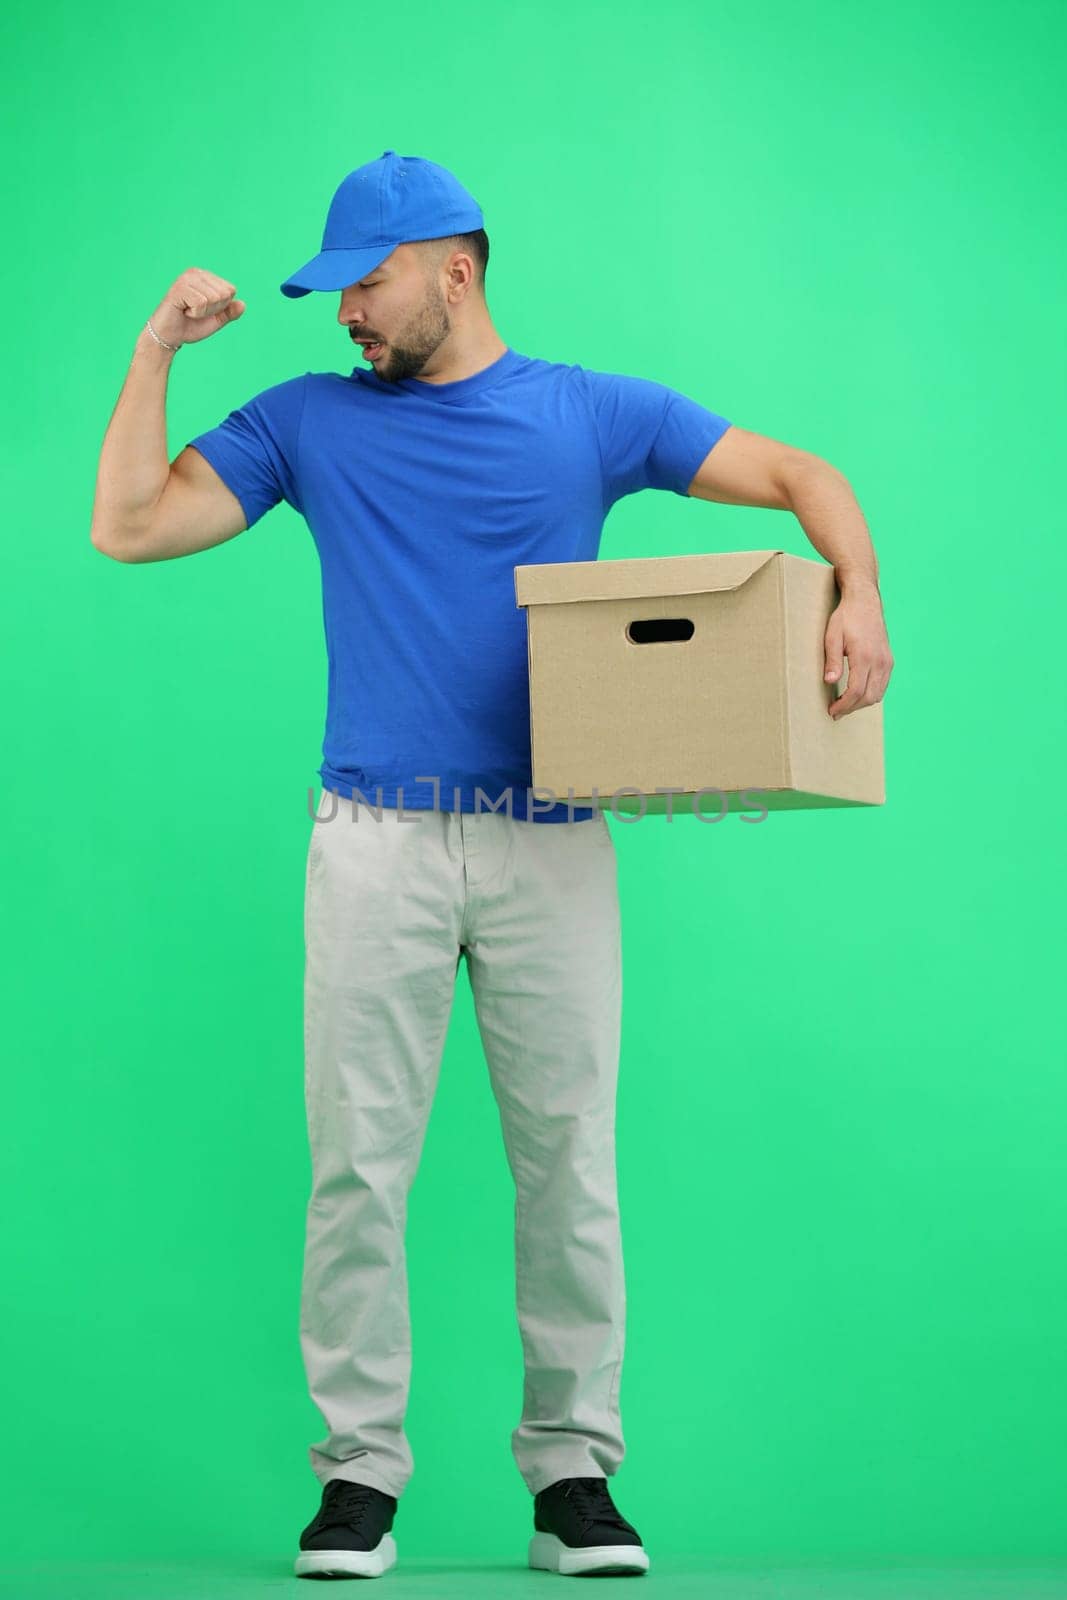 The deliveryman, in full height, on a green background, with a box, shows strength by Prosto